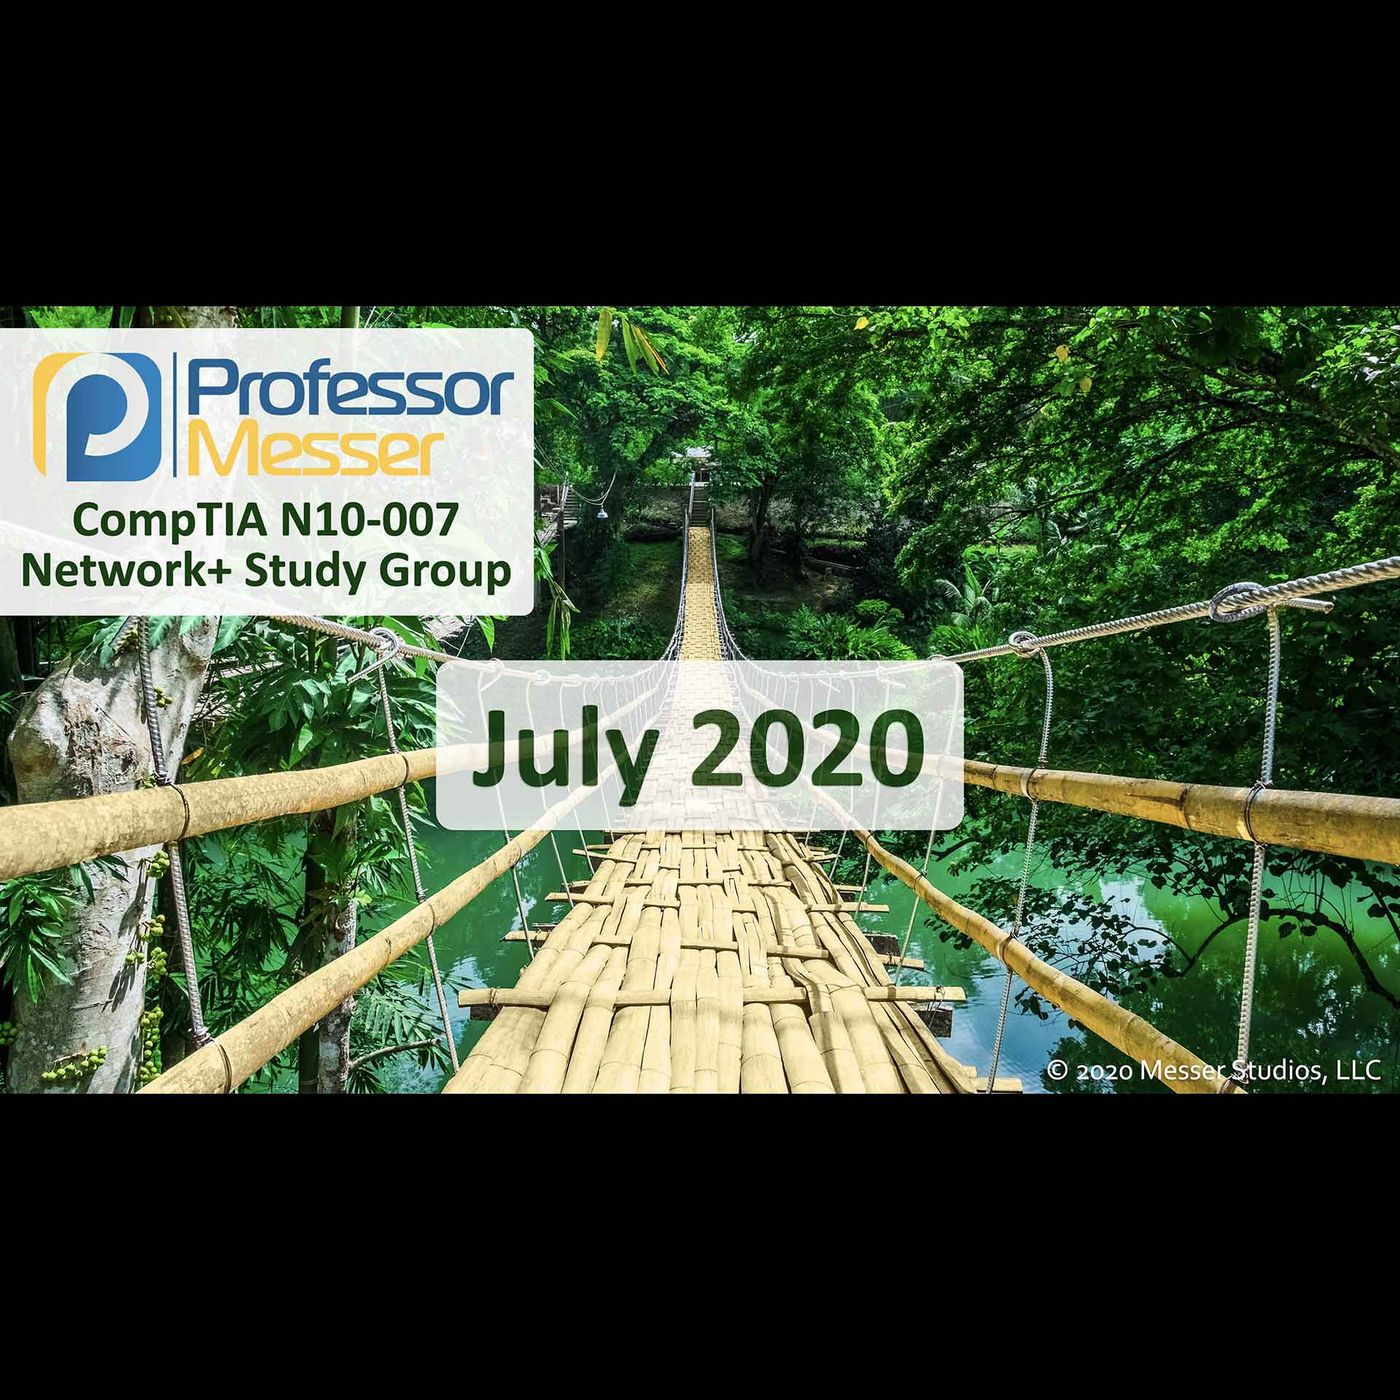 Professor Messer's Network+ Study Group After Show - July 2020